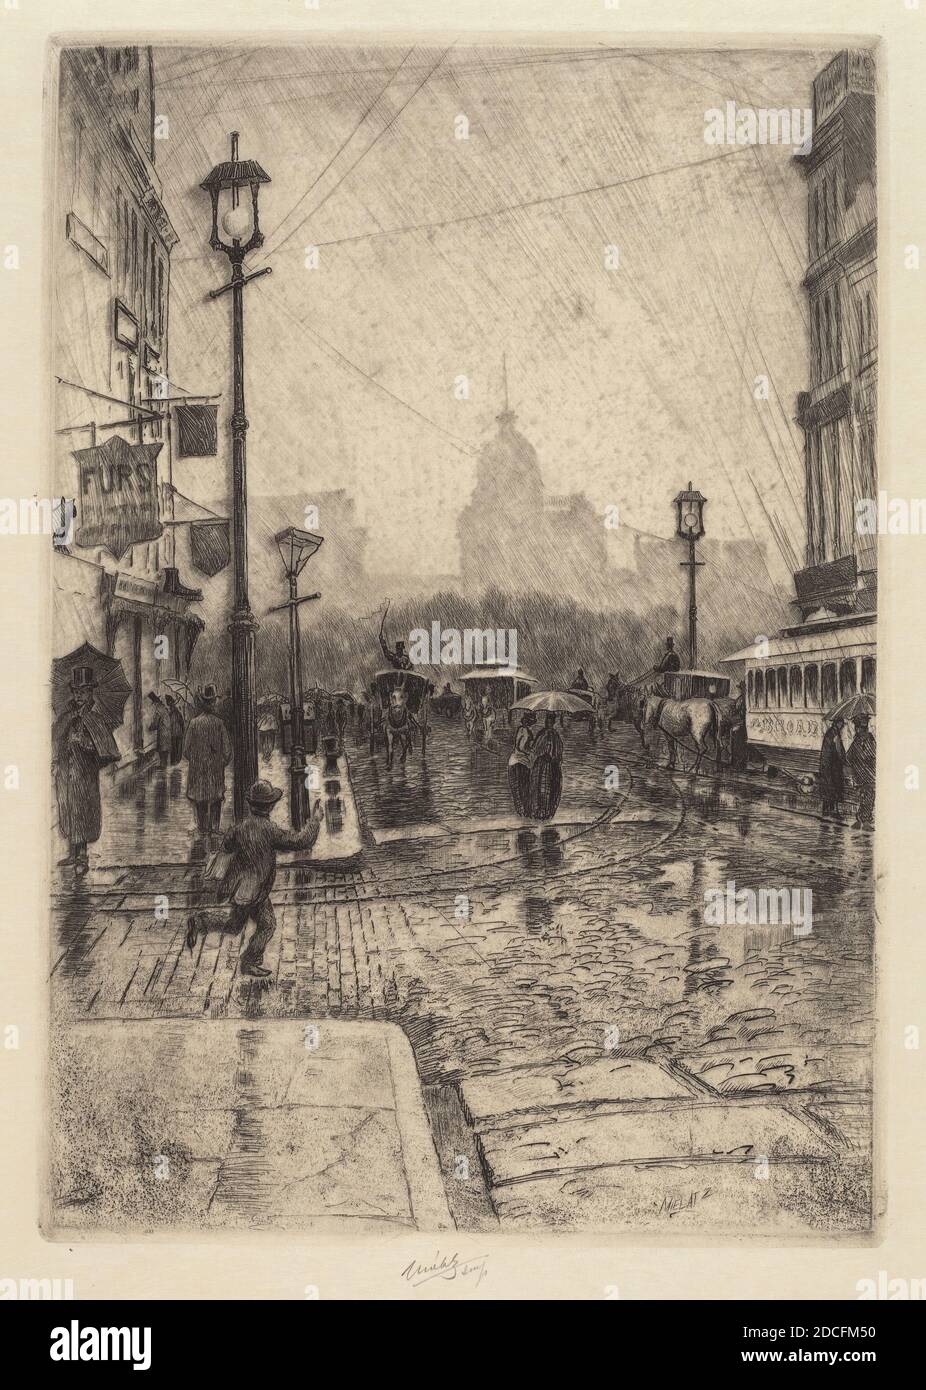 Charles Frederick William Mielatz, (artist), American, 1864 - 1919, Rainy Day, Broadway, probably 1890, etching and aquatint Stock Photo